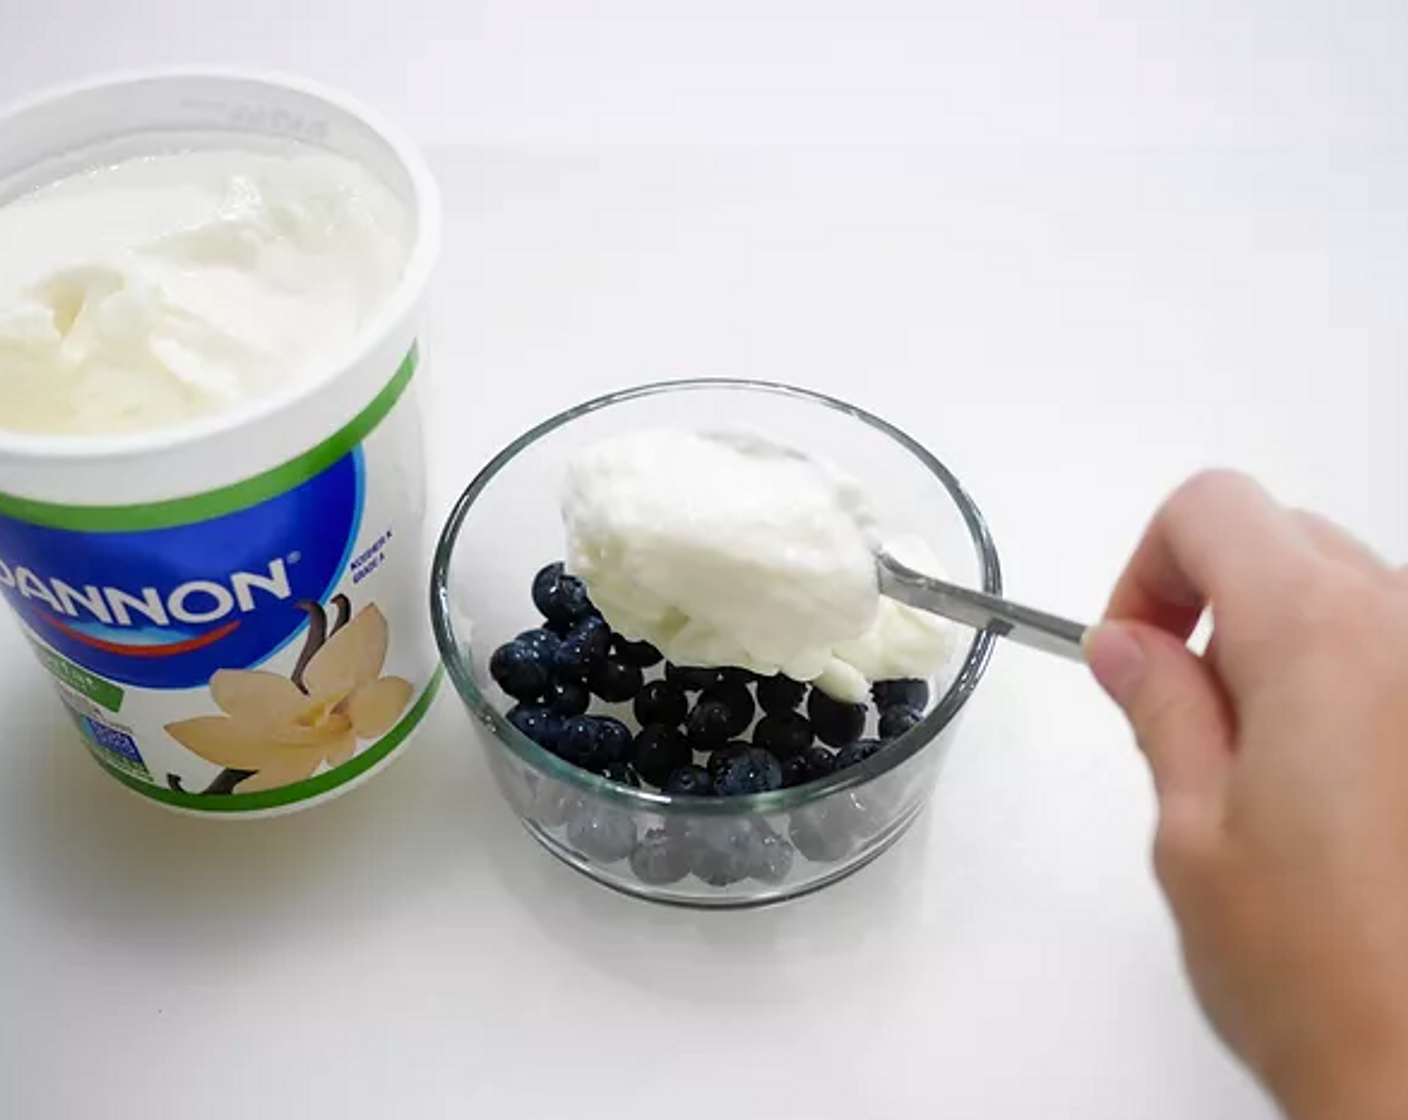 step 2 Use a spoon to scoop the Yogurt (to taste) into the bowl.